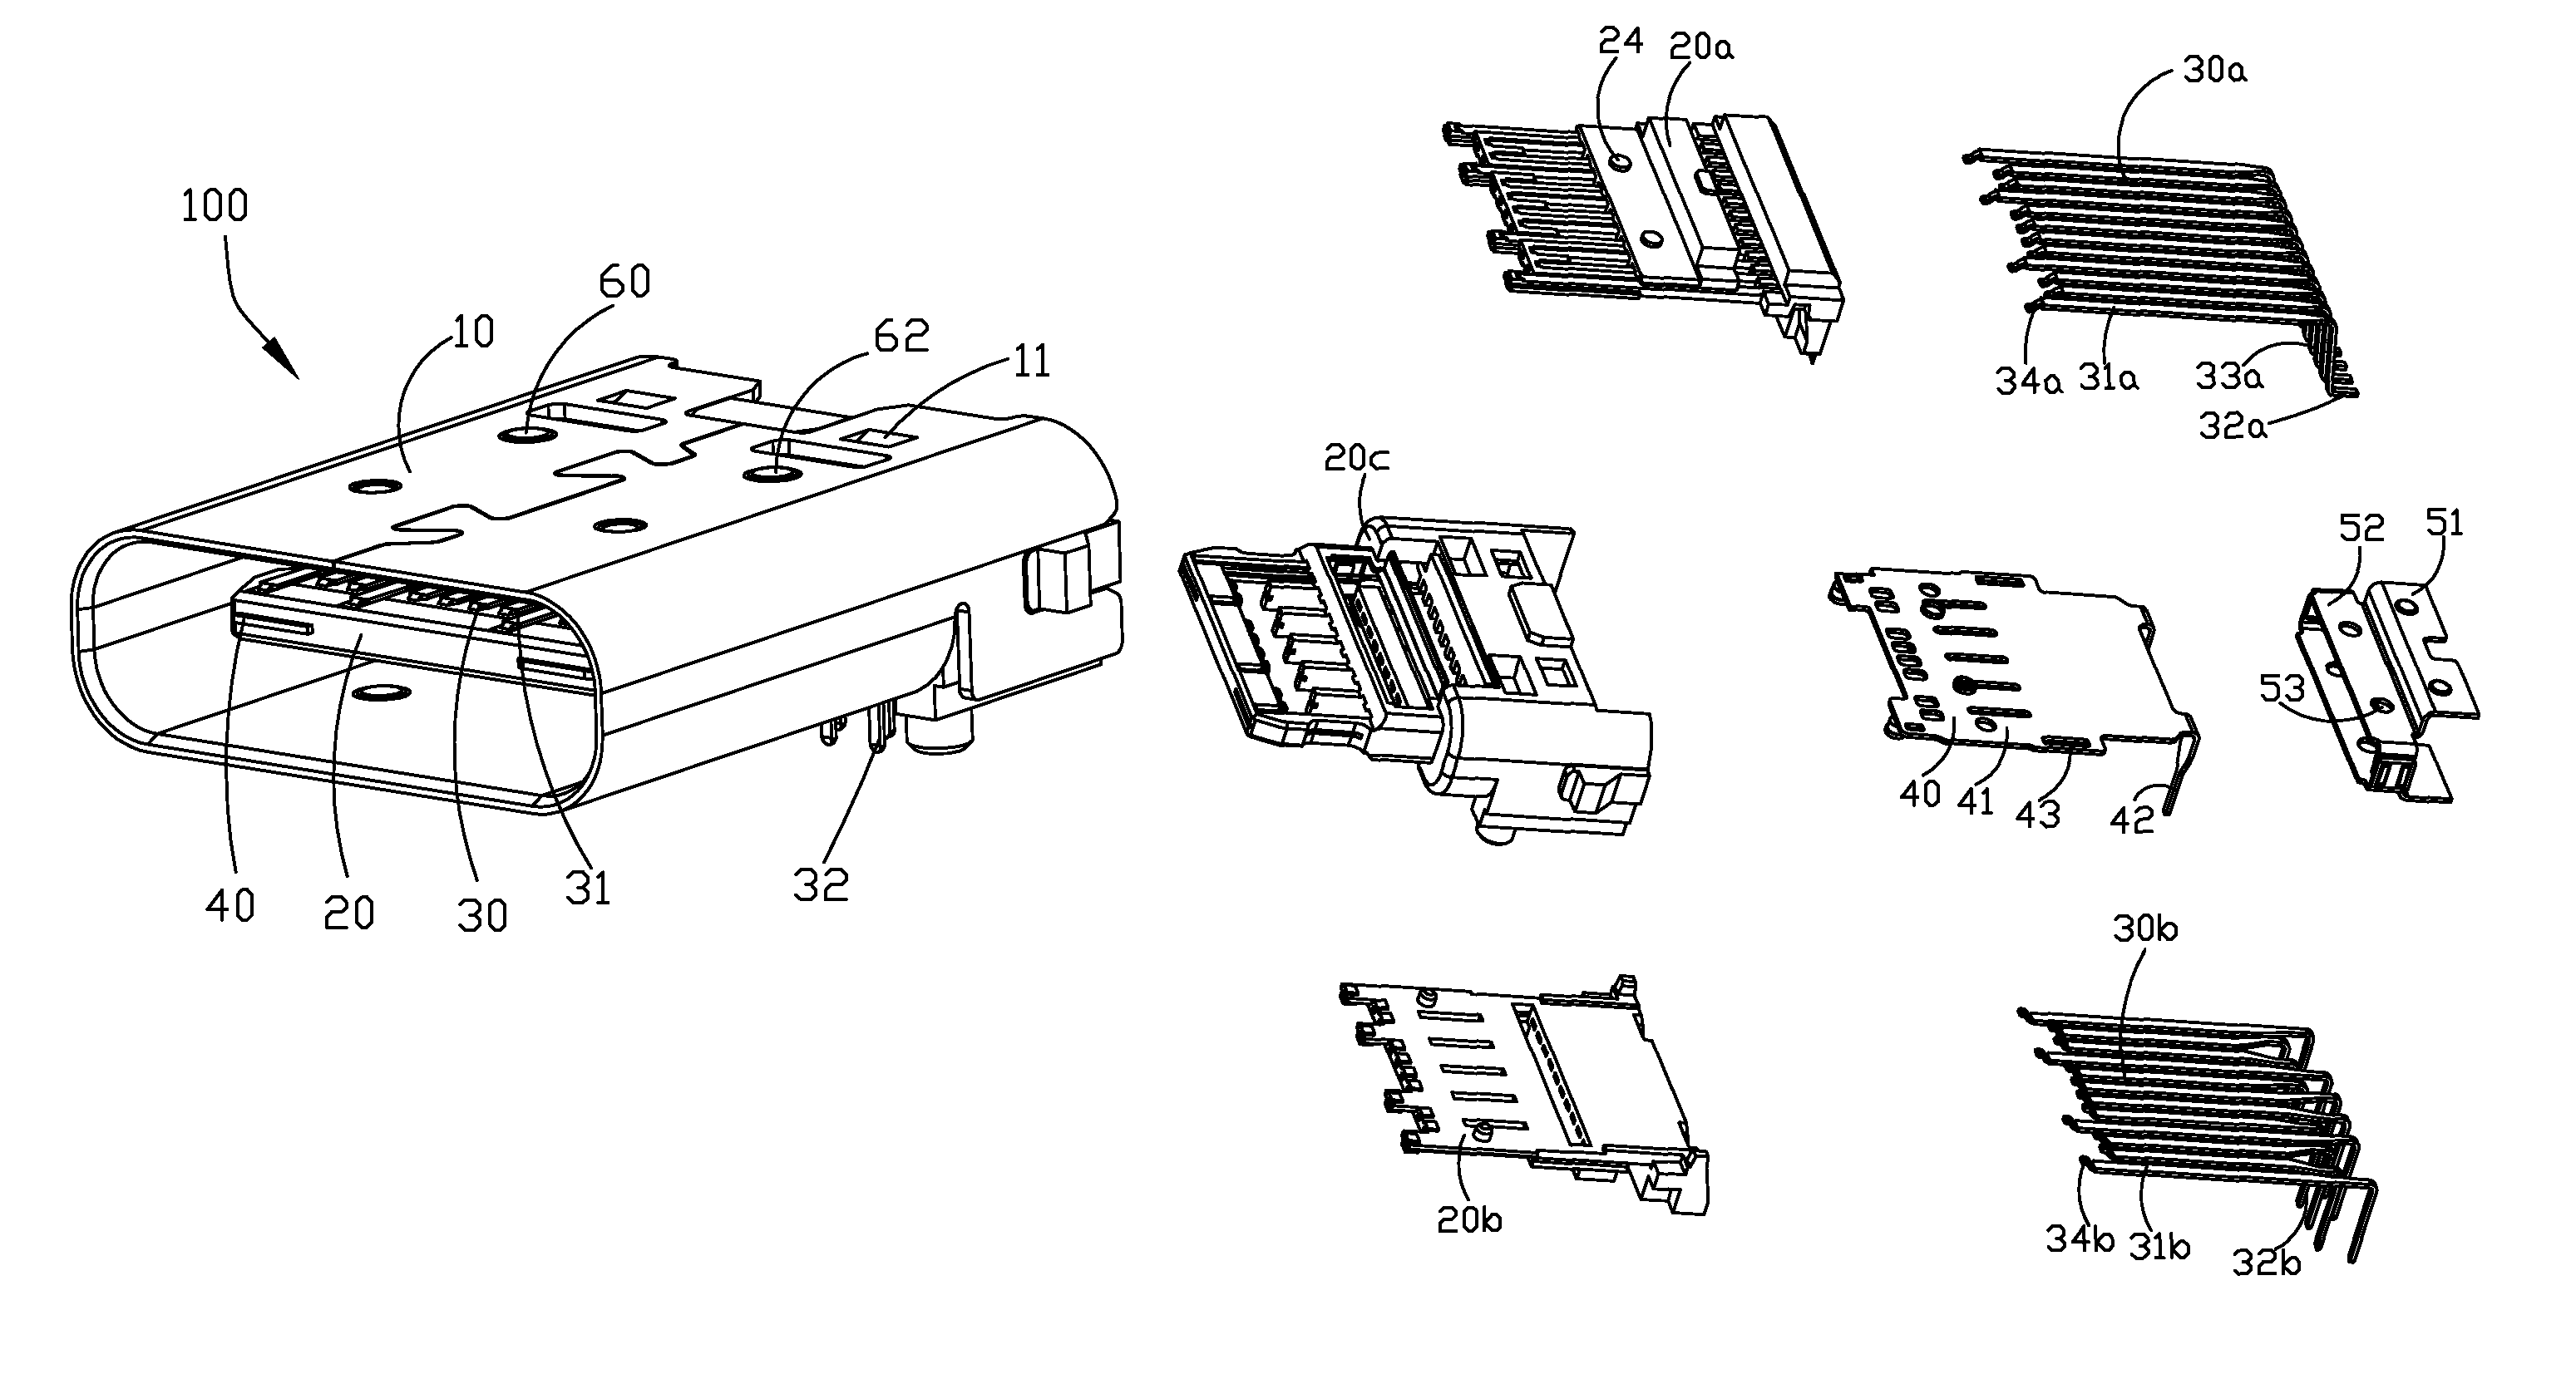 Electrical connector having a metallic inner shell between a metallic outer shell and an insulative housing